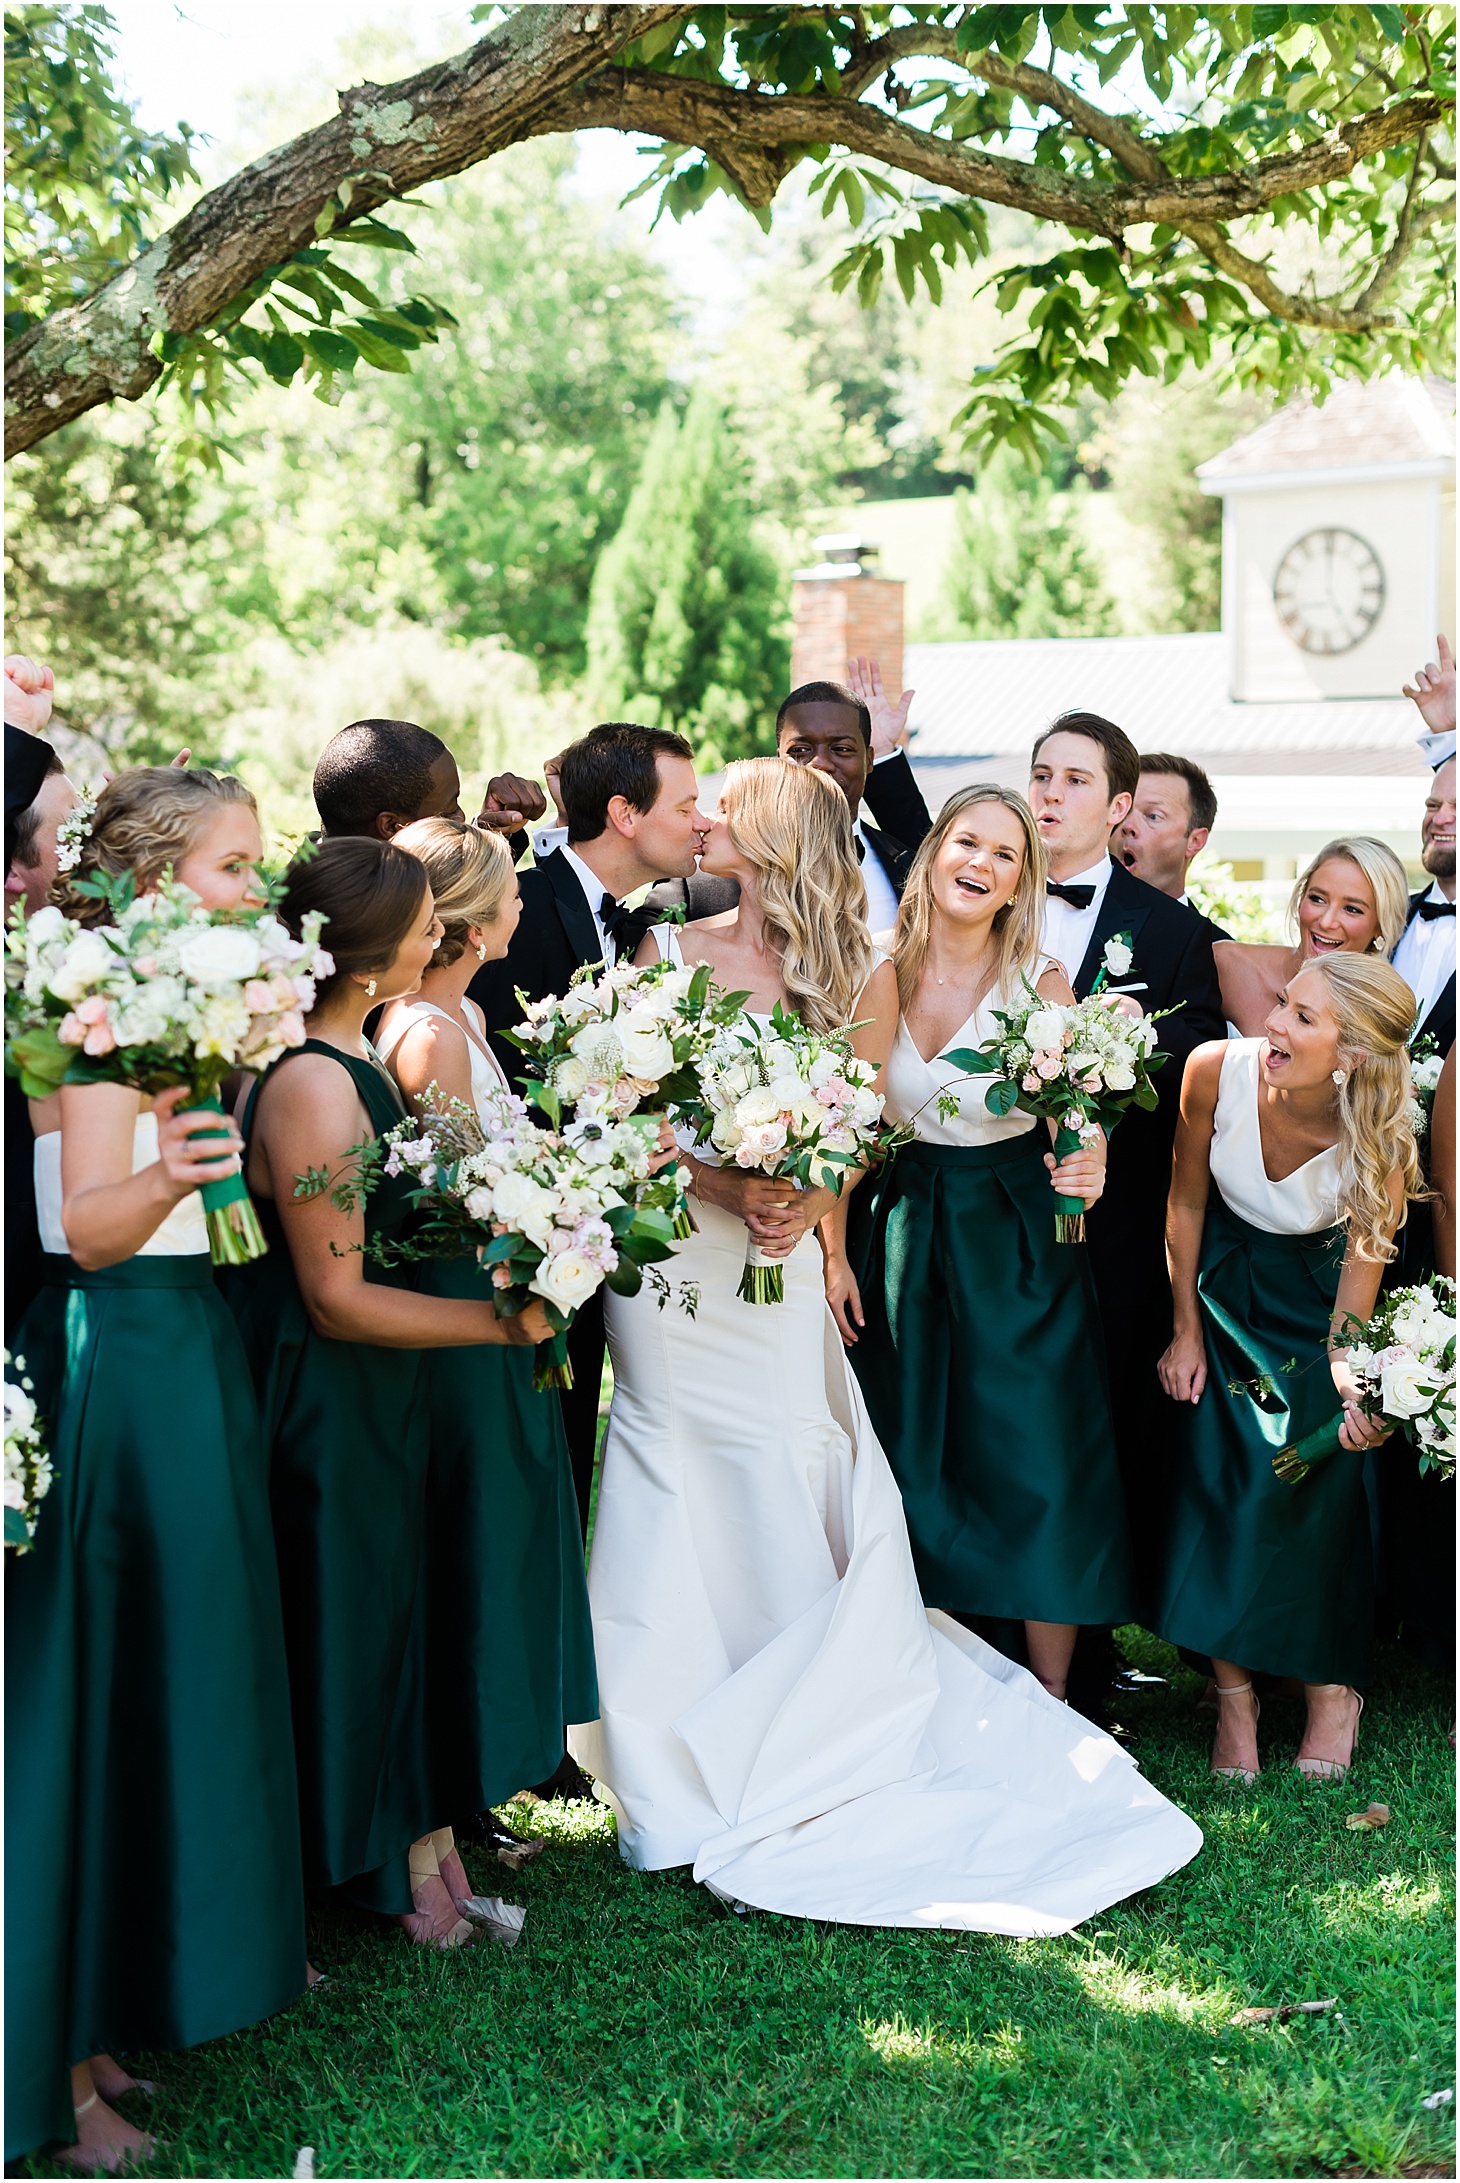 Wedding Party at the Inn at Willow Grove, Green and White Summer Wedding at The Inn at Willow Grove, Ceremony at St. Isidore the Farmer Catholic Church, Sarah Bradshaw Photography, DC Wedding Photographer